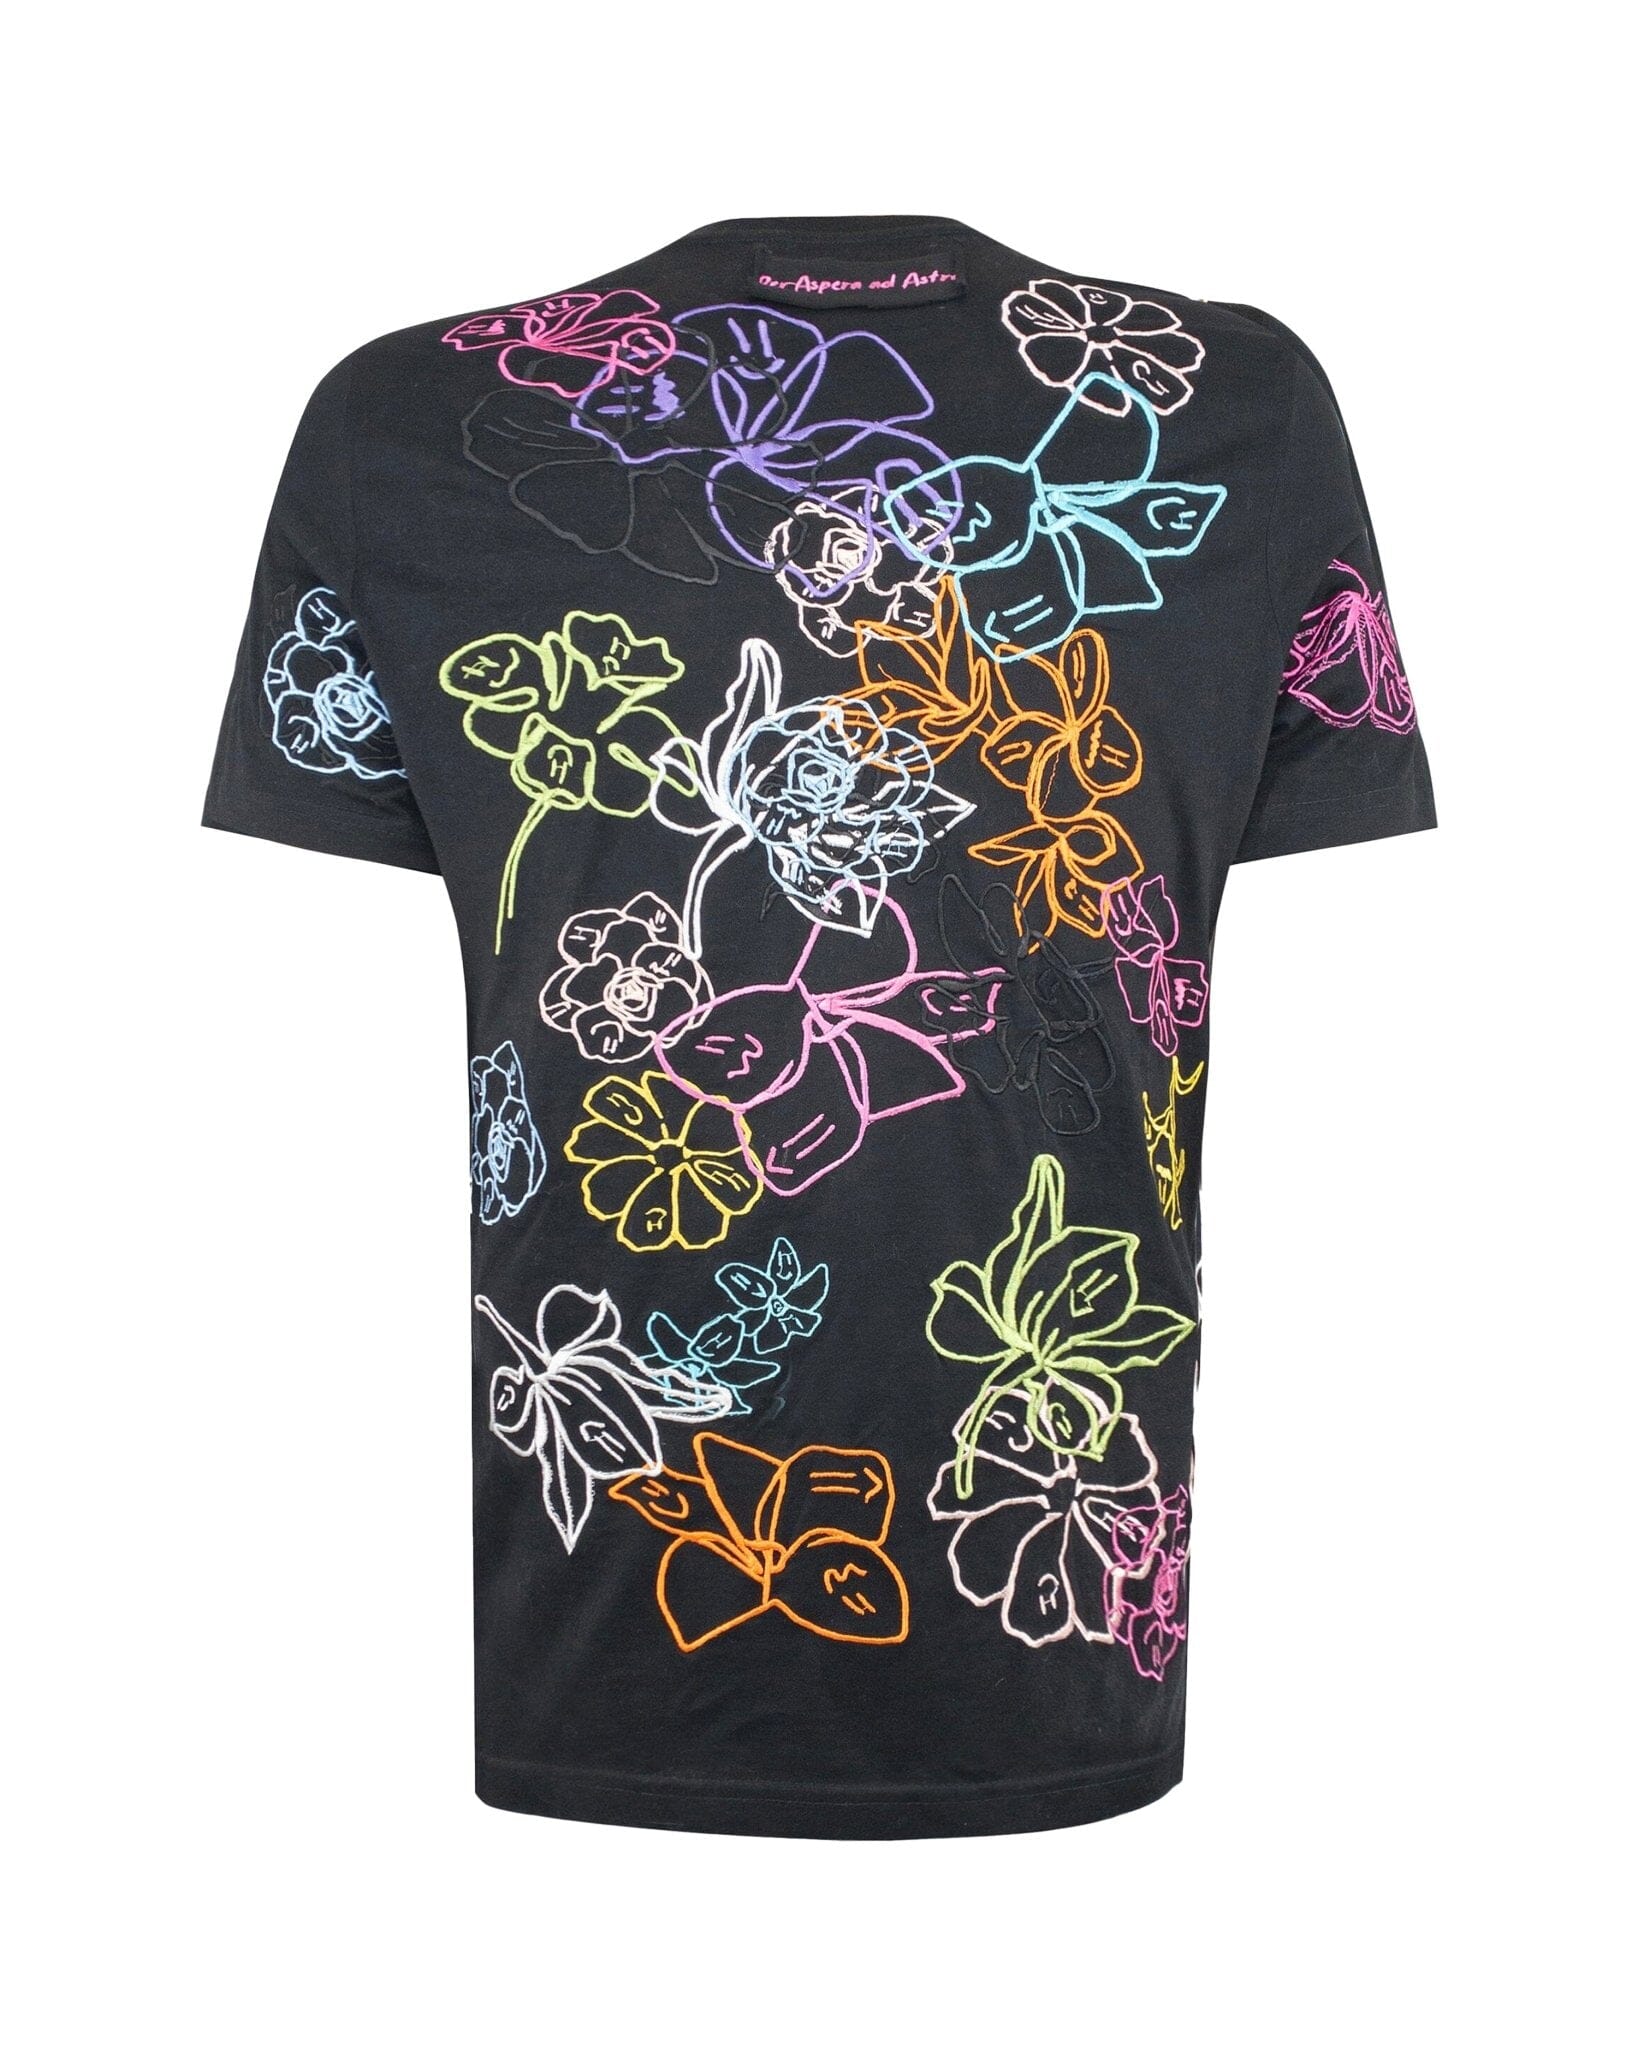 Tee Regular embroidery all over